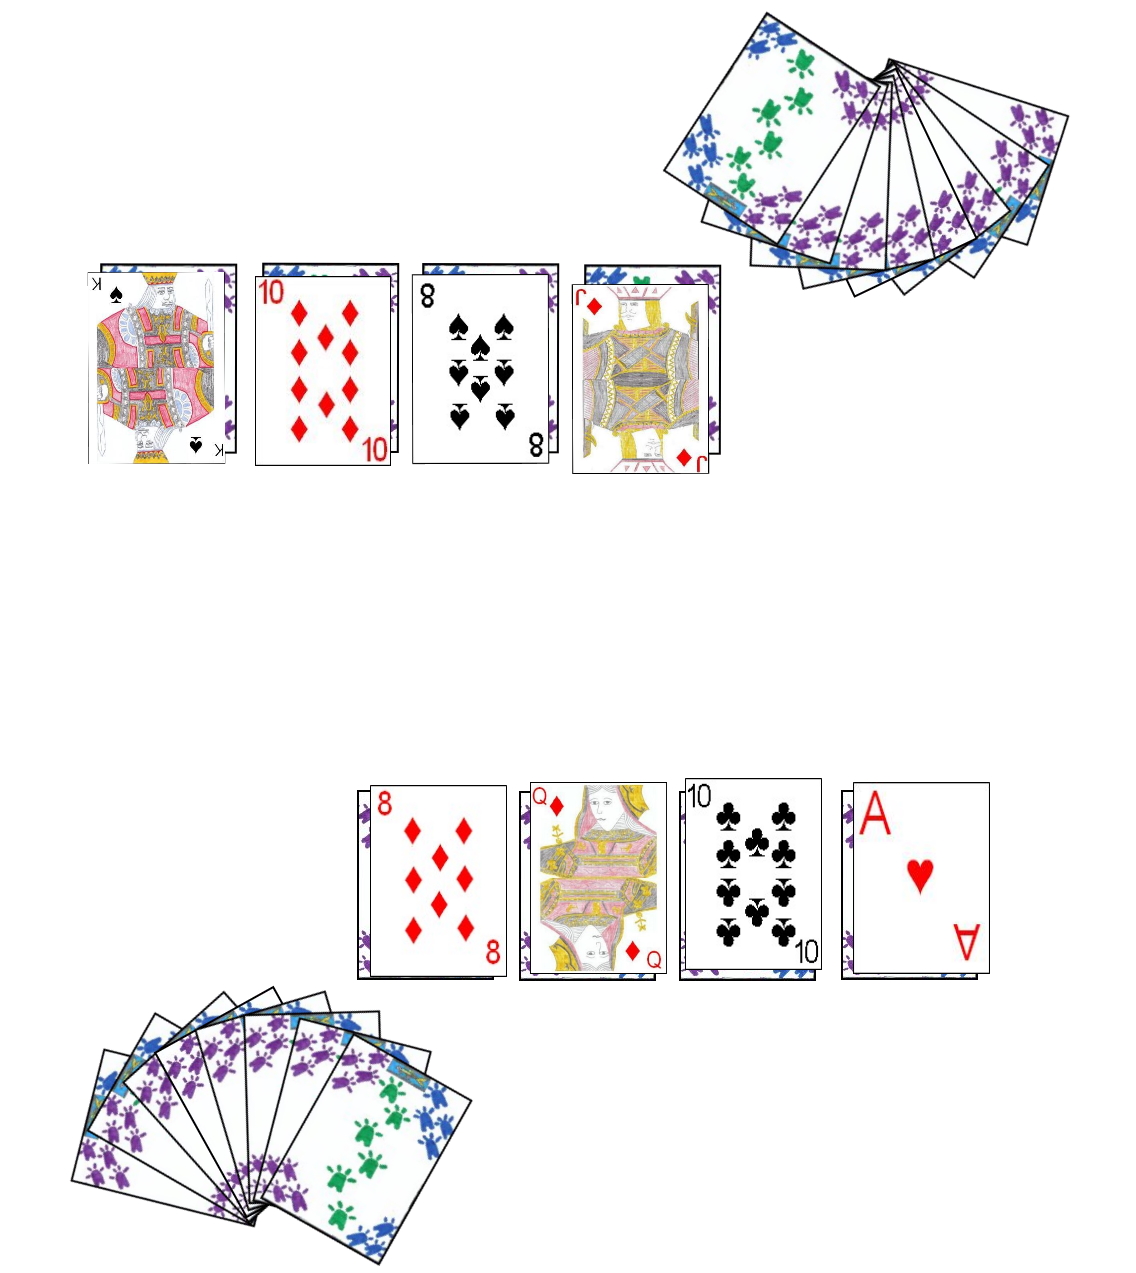 Sample layout for Two-Player Manille